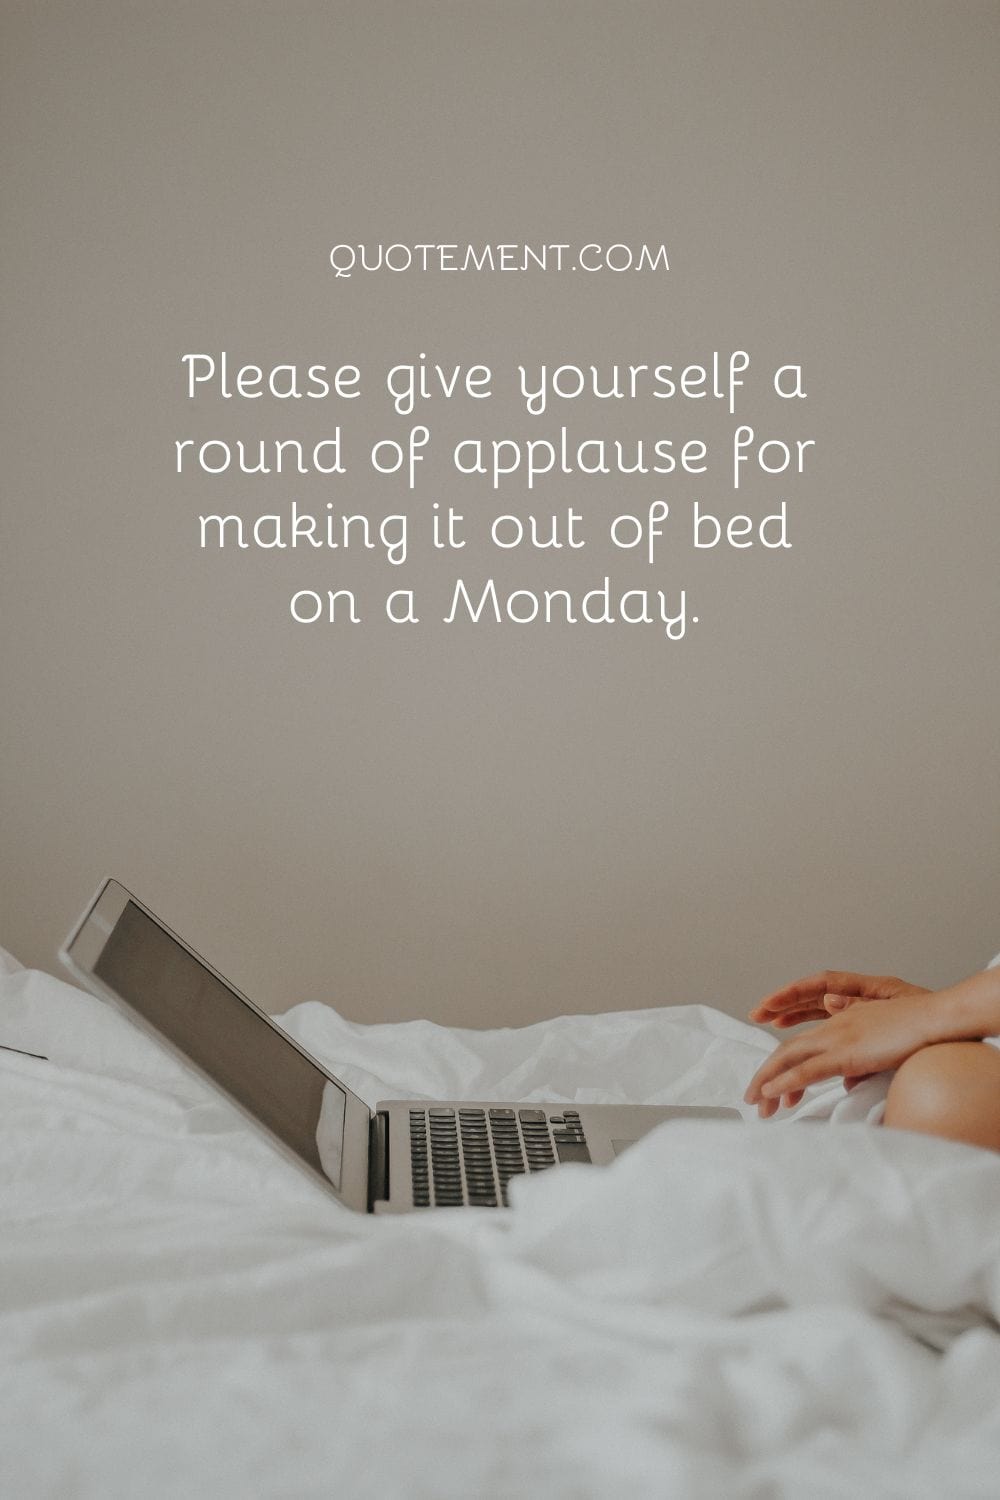 Please give yourself a round of applause for making it out of bed on a Monday